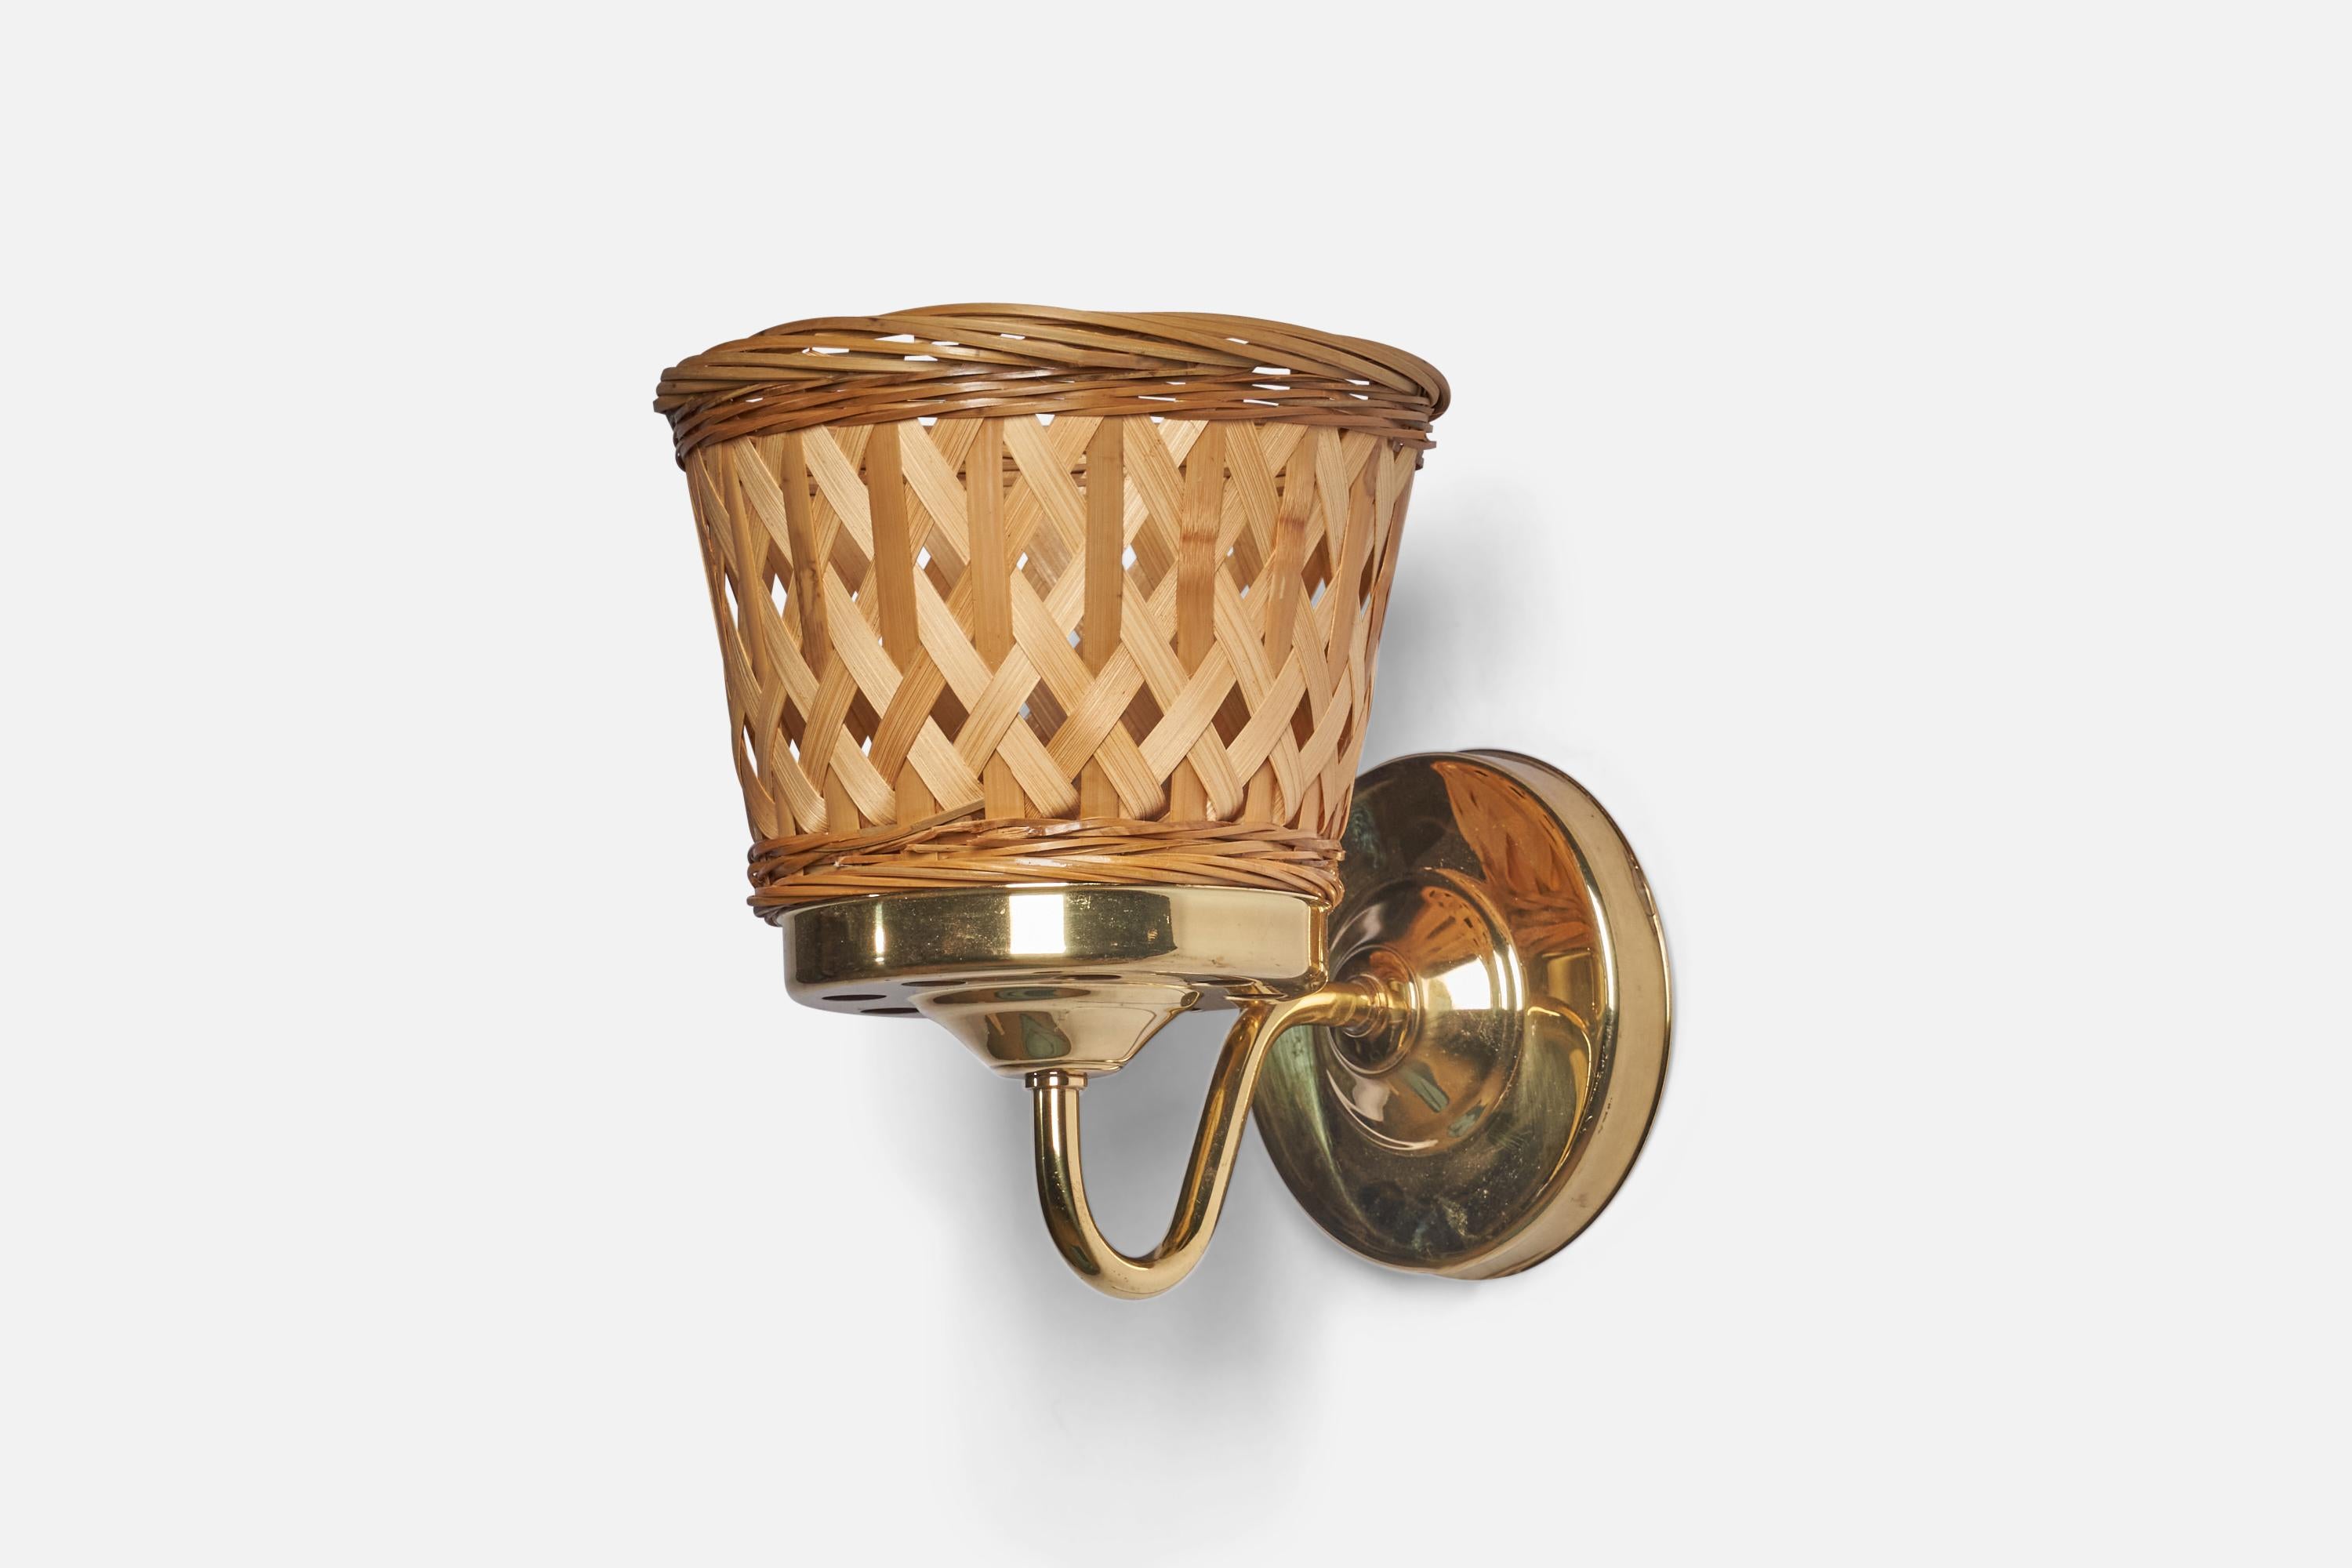 A pair of brass and rattan wall lights, designed and produced in Sweden, c. 1970s.

Overall Dimensions: 7.75